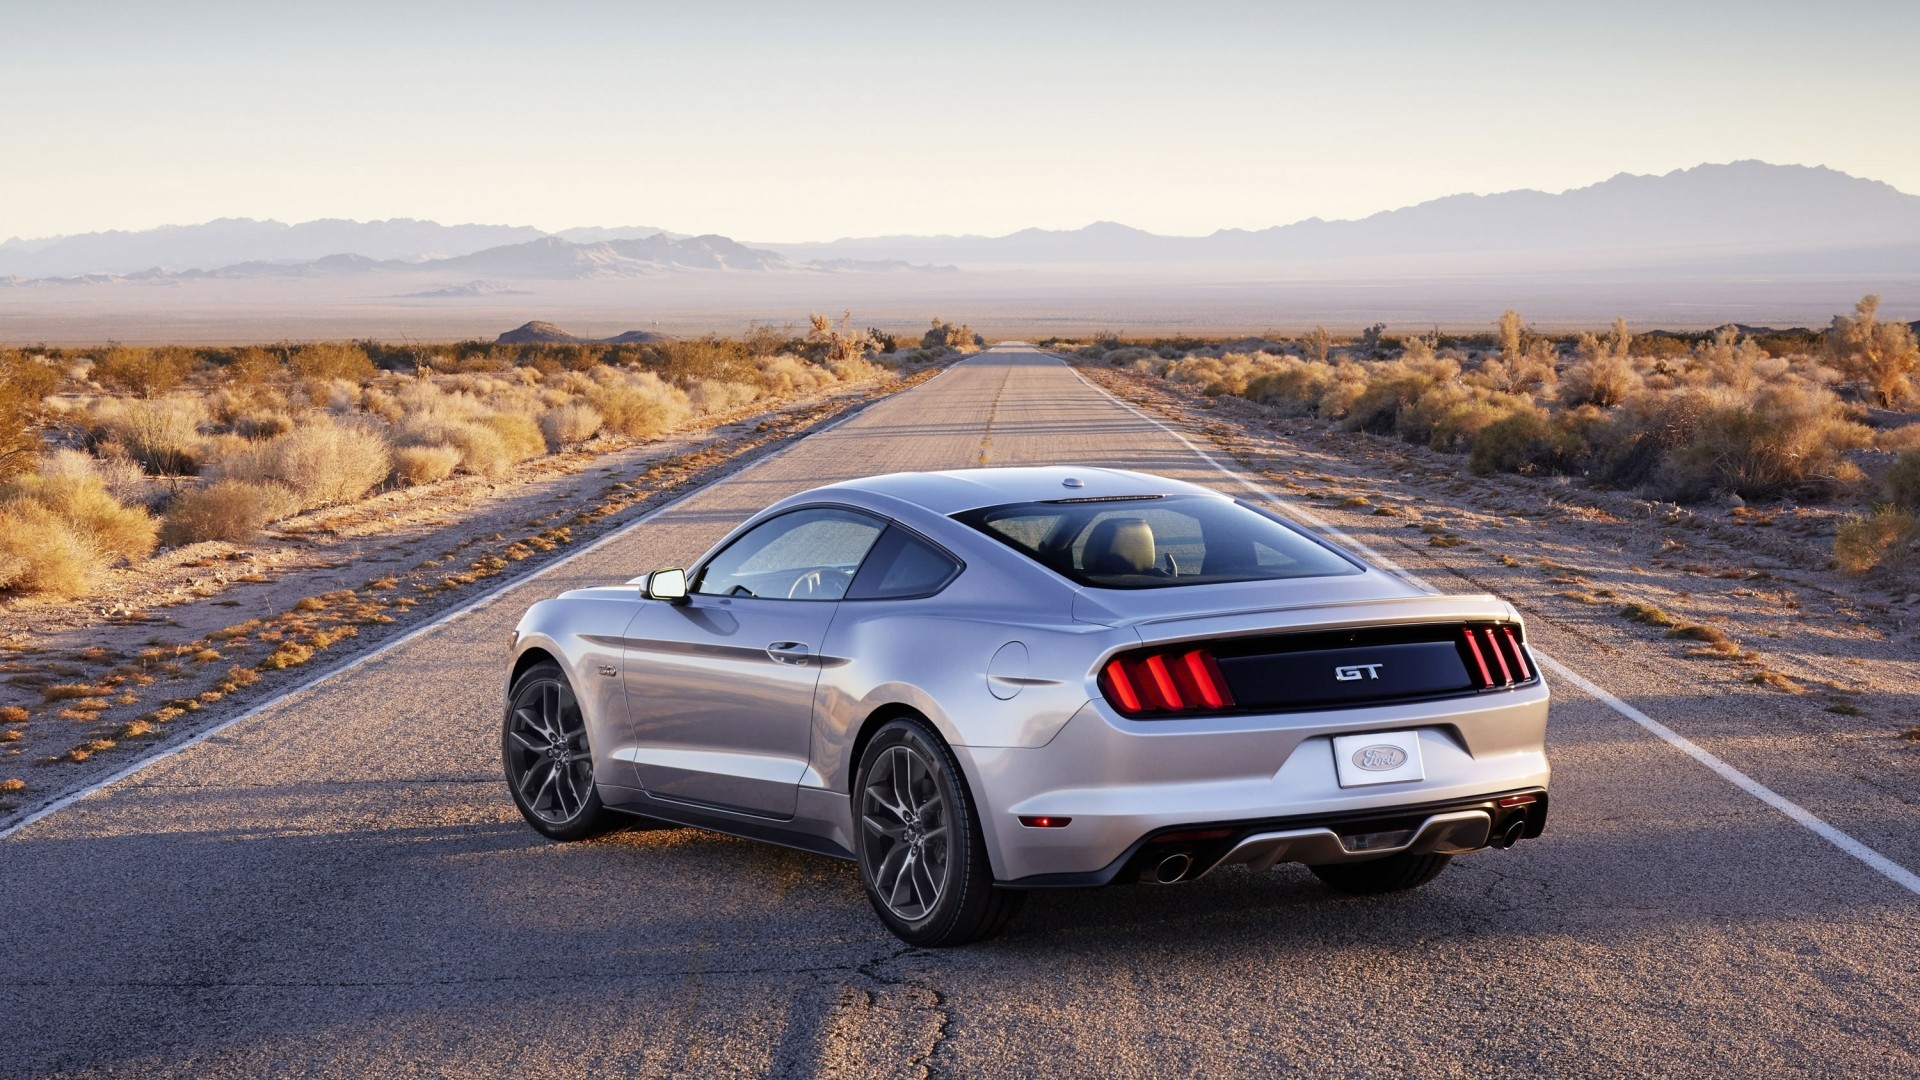 Ford Ford Mustang GT 2015 1920x1080